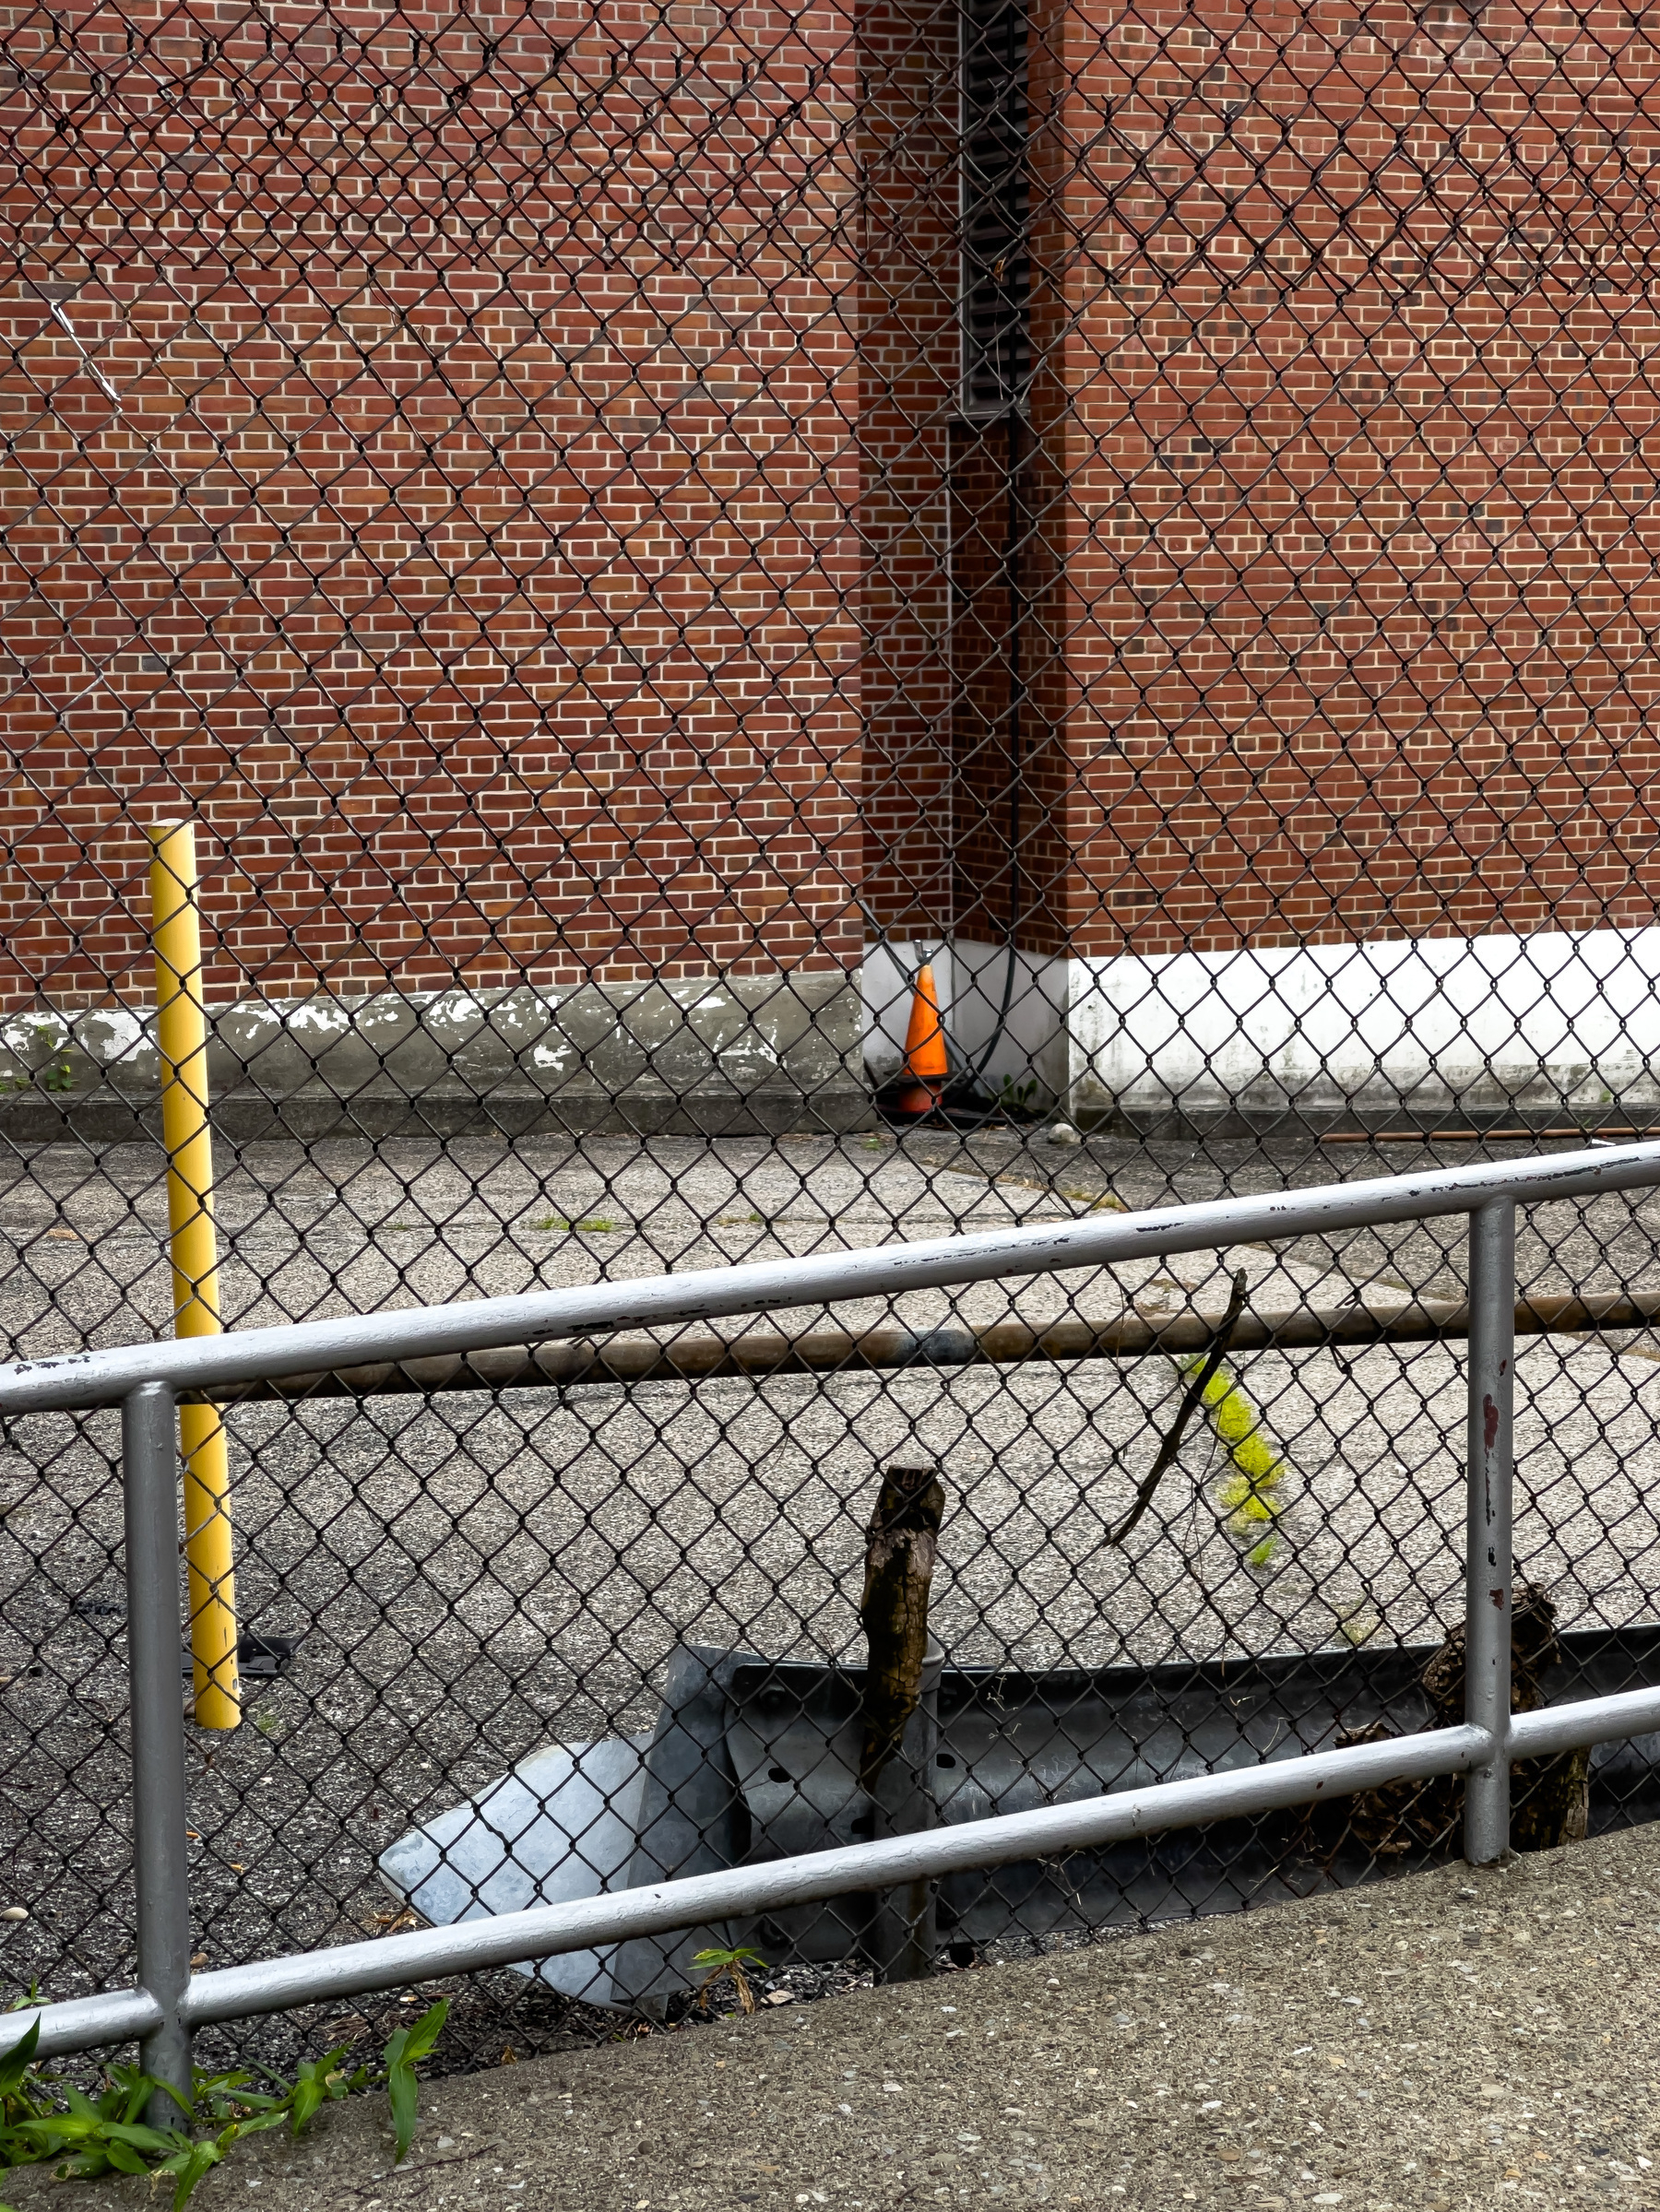 Streetscape, side of brick building in the background, metal railing and chain link fence in foreground, vertical yellow pipe vehicle barrier in the near mid ground on the left.